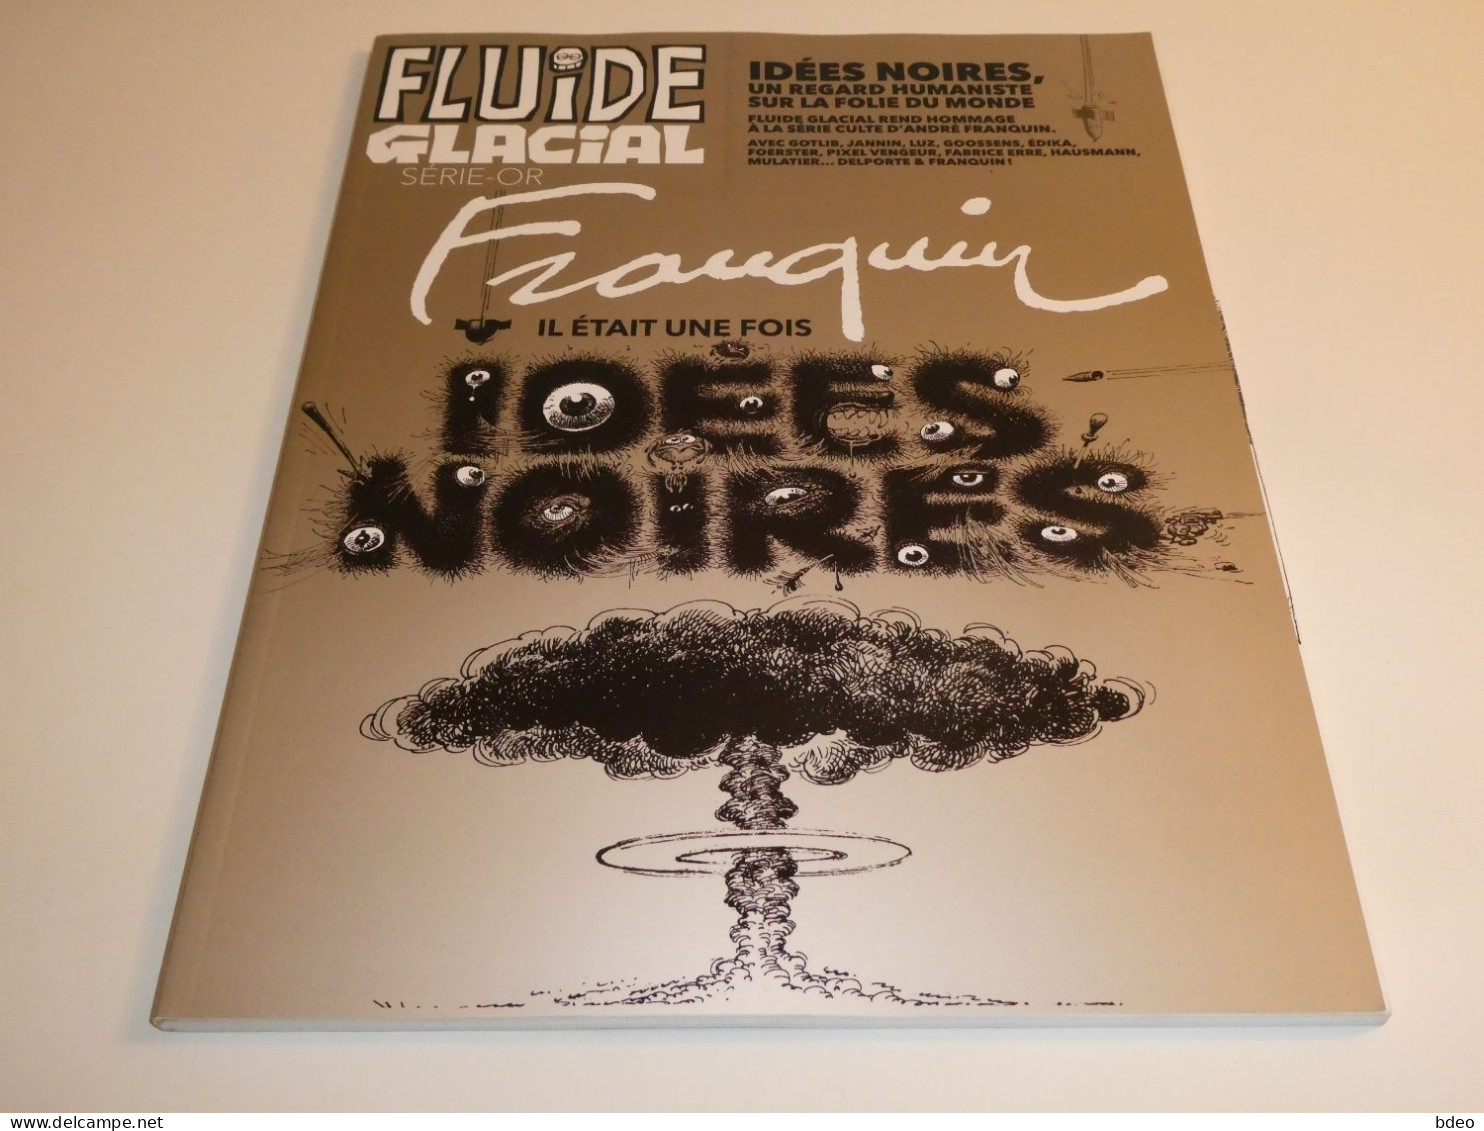 IDEES NOIRES TOME 1 + FLUIDE GLACIAL SERIE OR / FRANQUIN / TBE